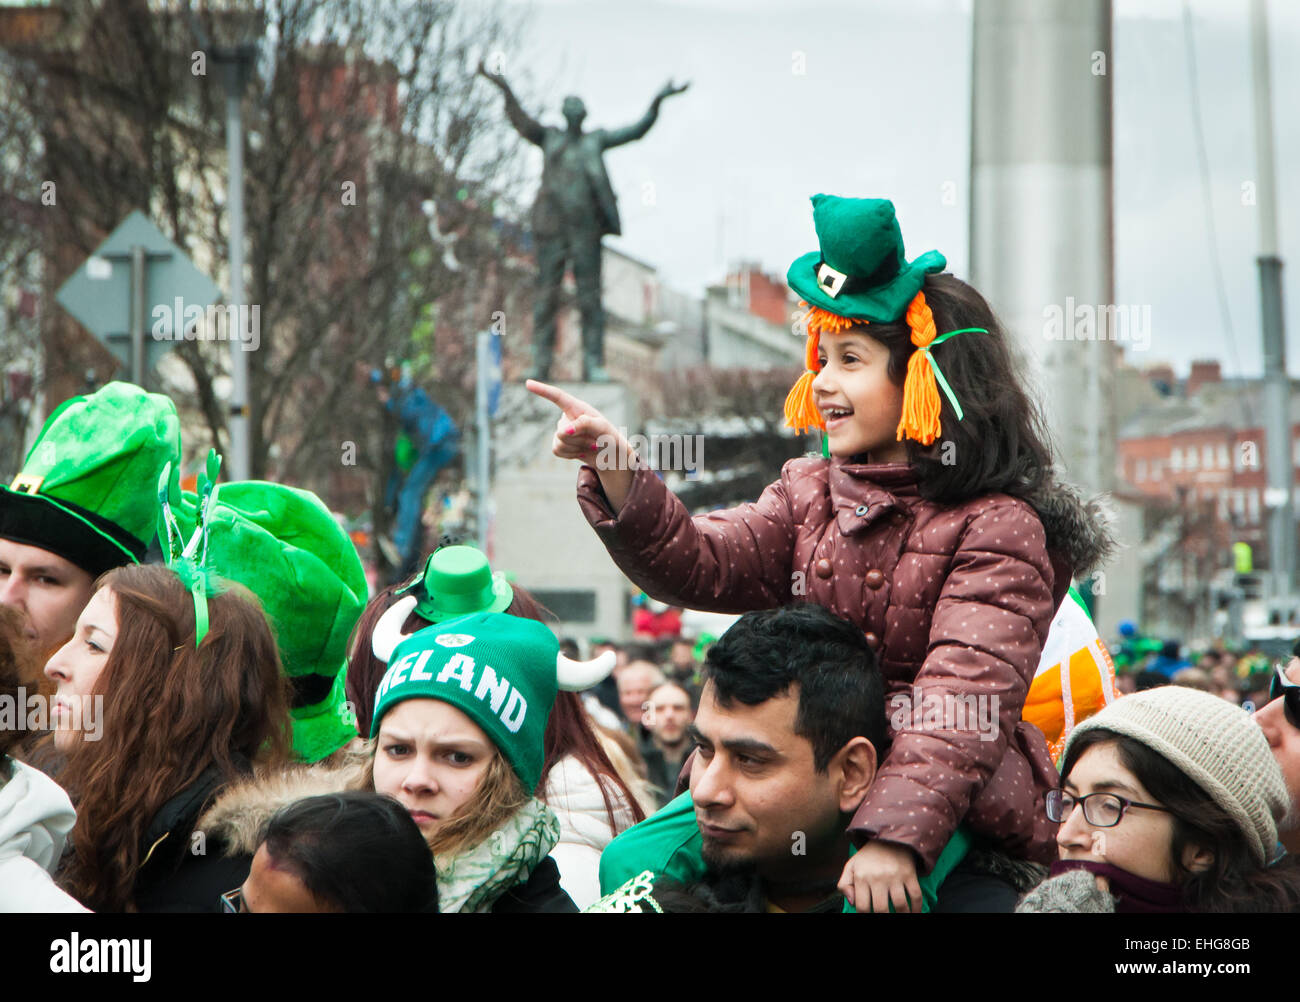 Young girl enjoys the St Patrick's day parade on O'Connell street Dublin wearing green hat and sitting on her father's shoulders Stock Photo